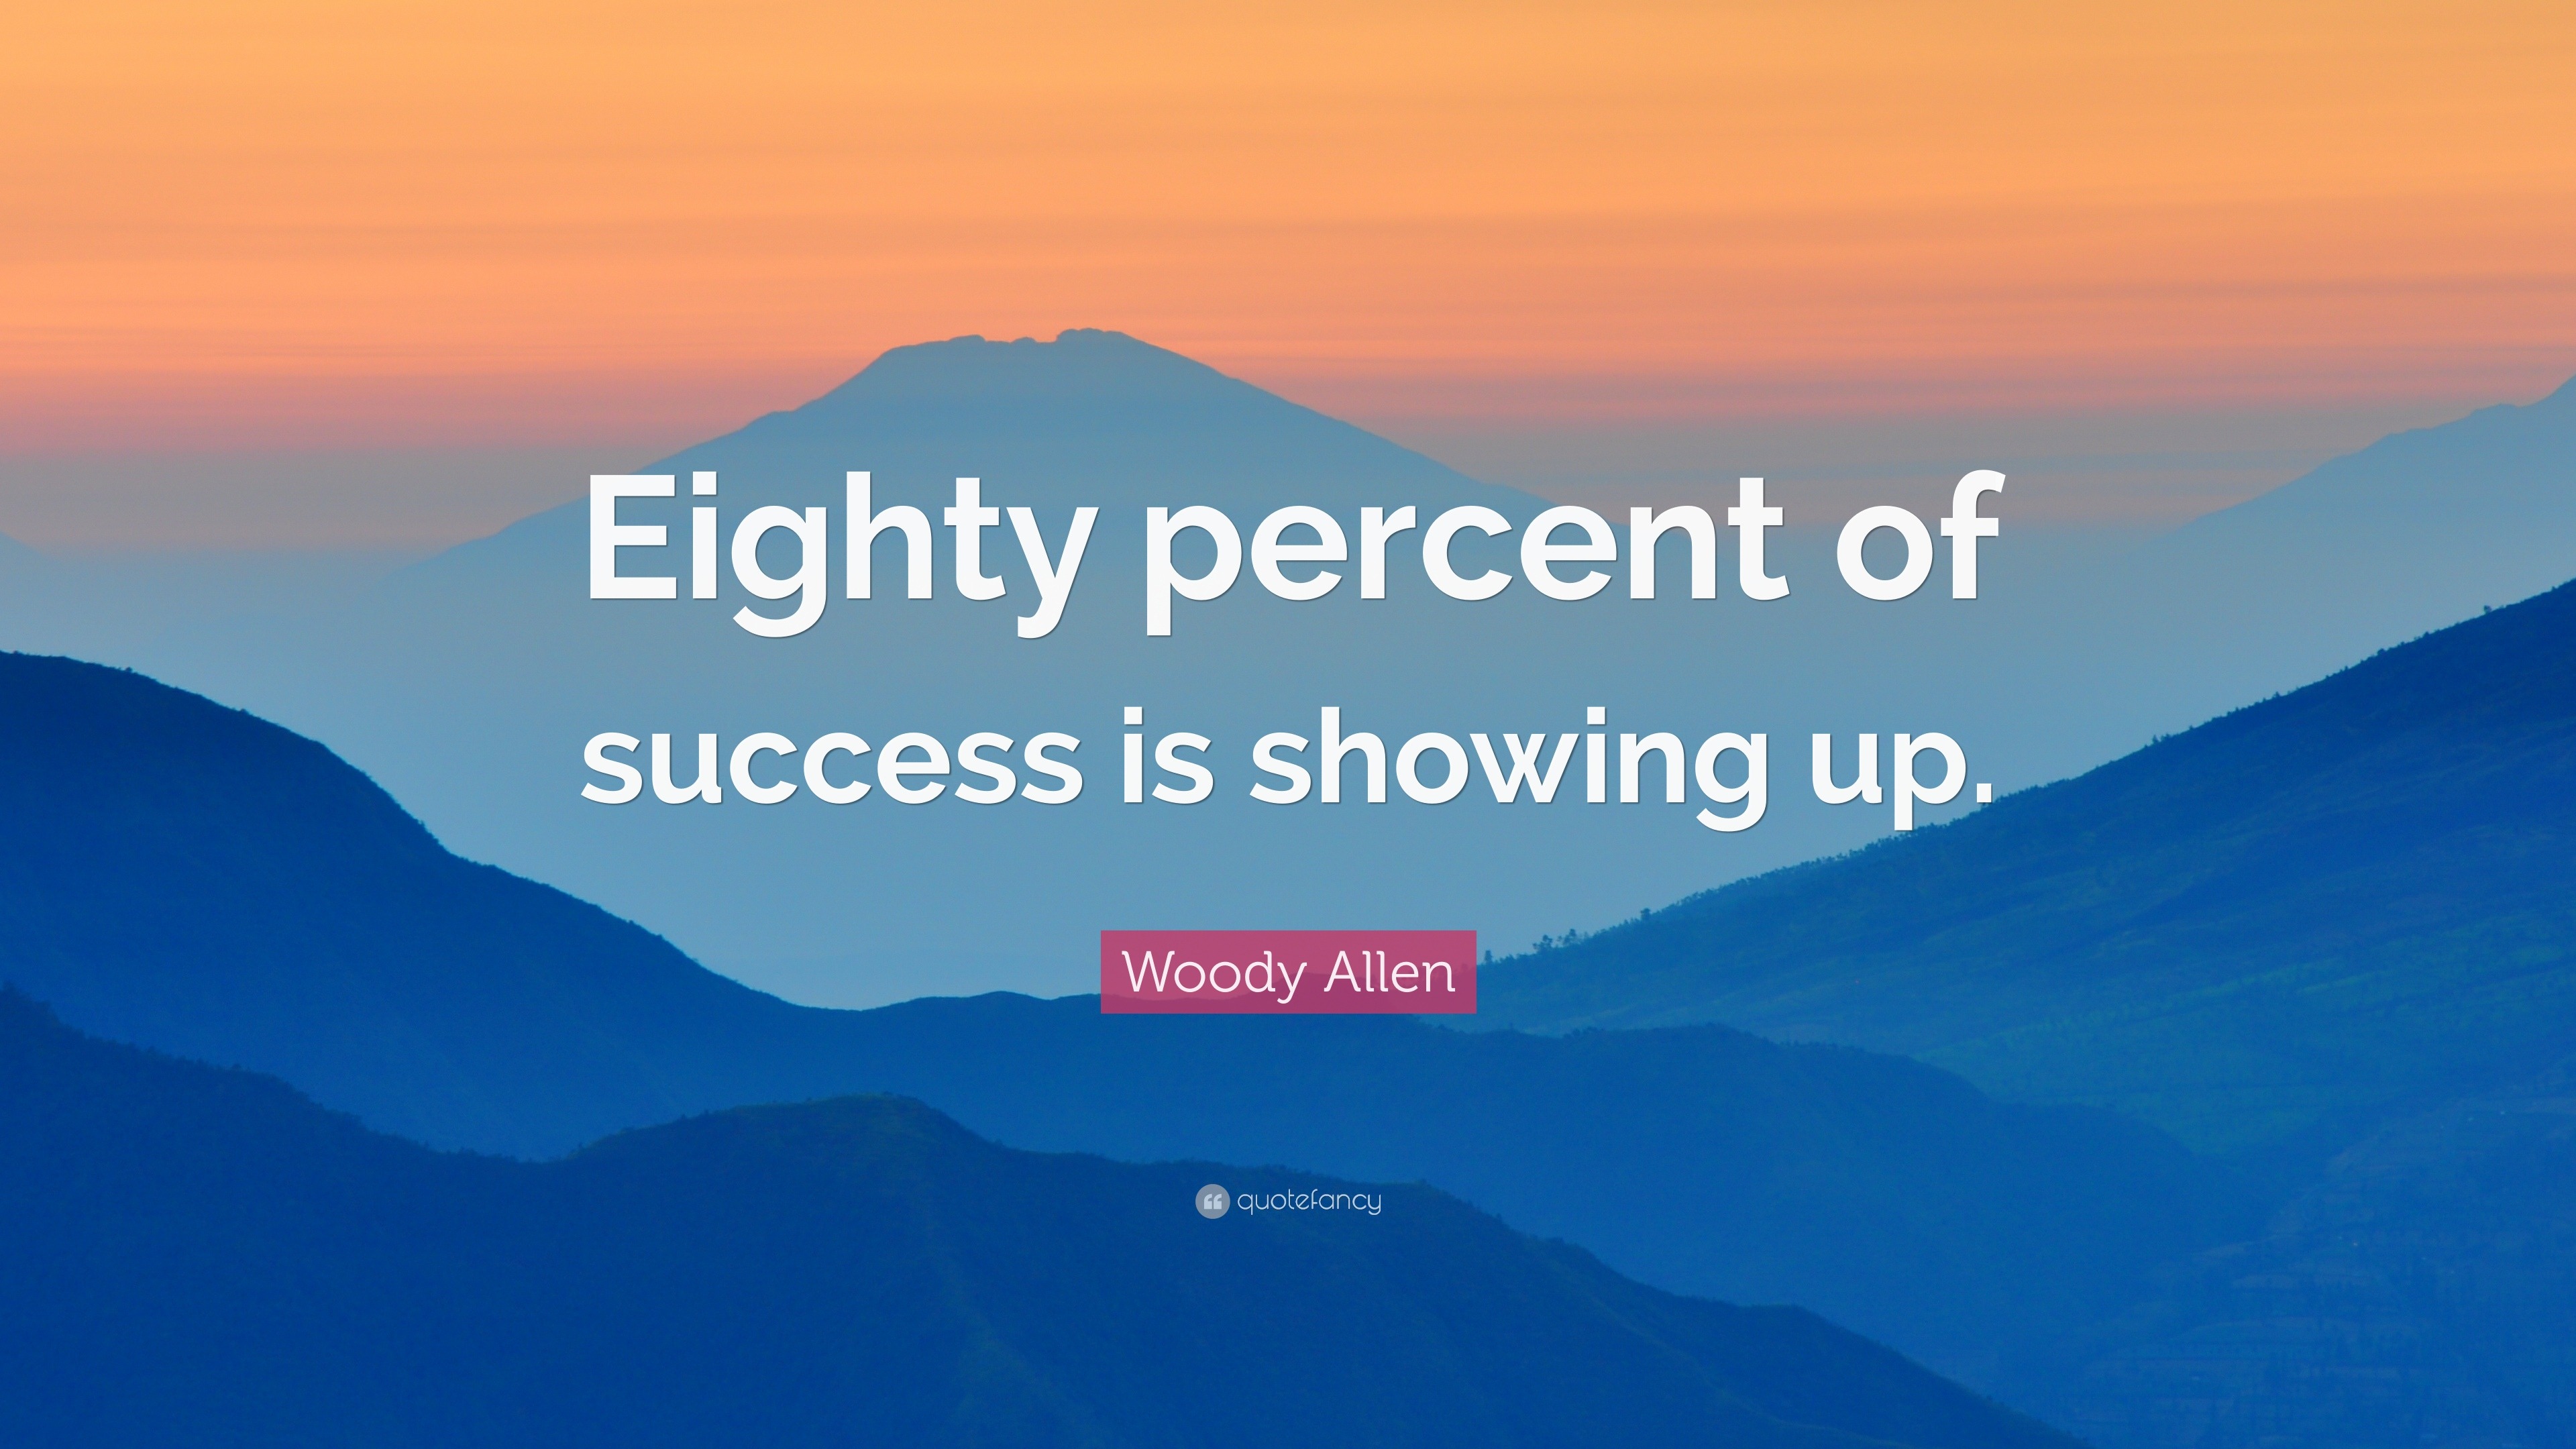 Woody Allen Quote “eighty Percent Of Success Is Showing Up” 0101